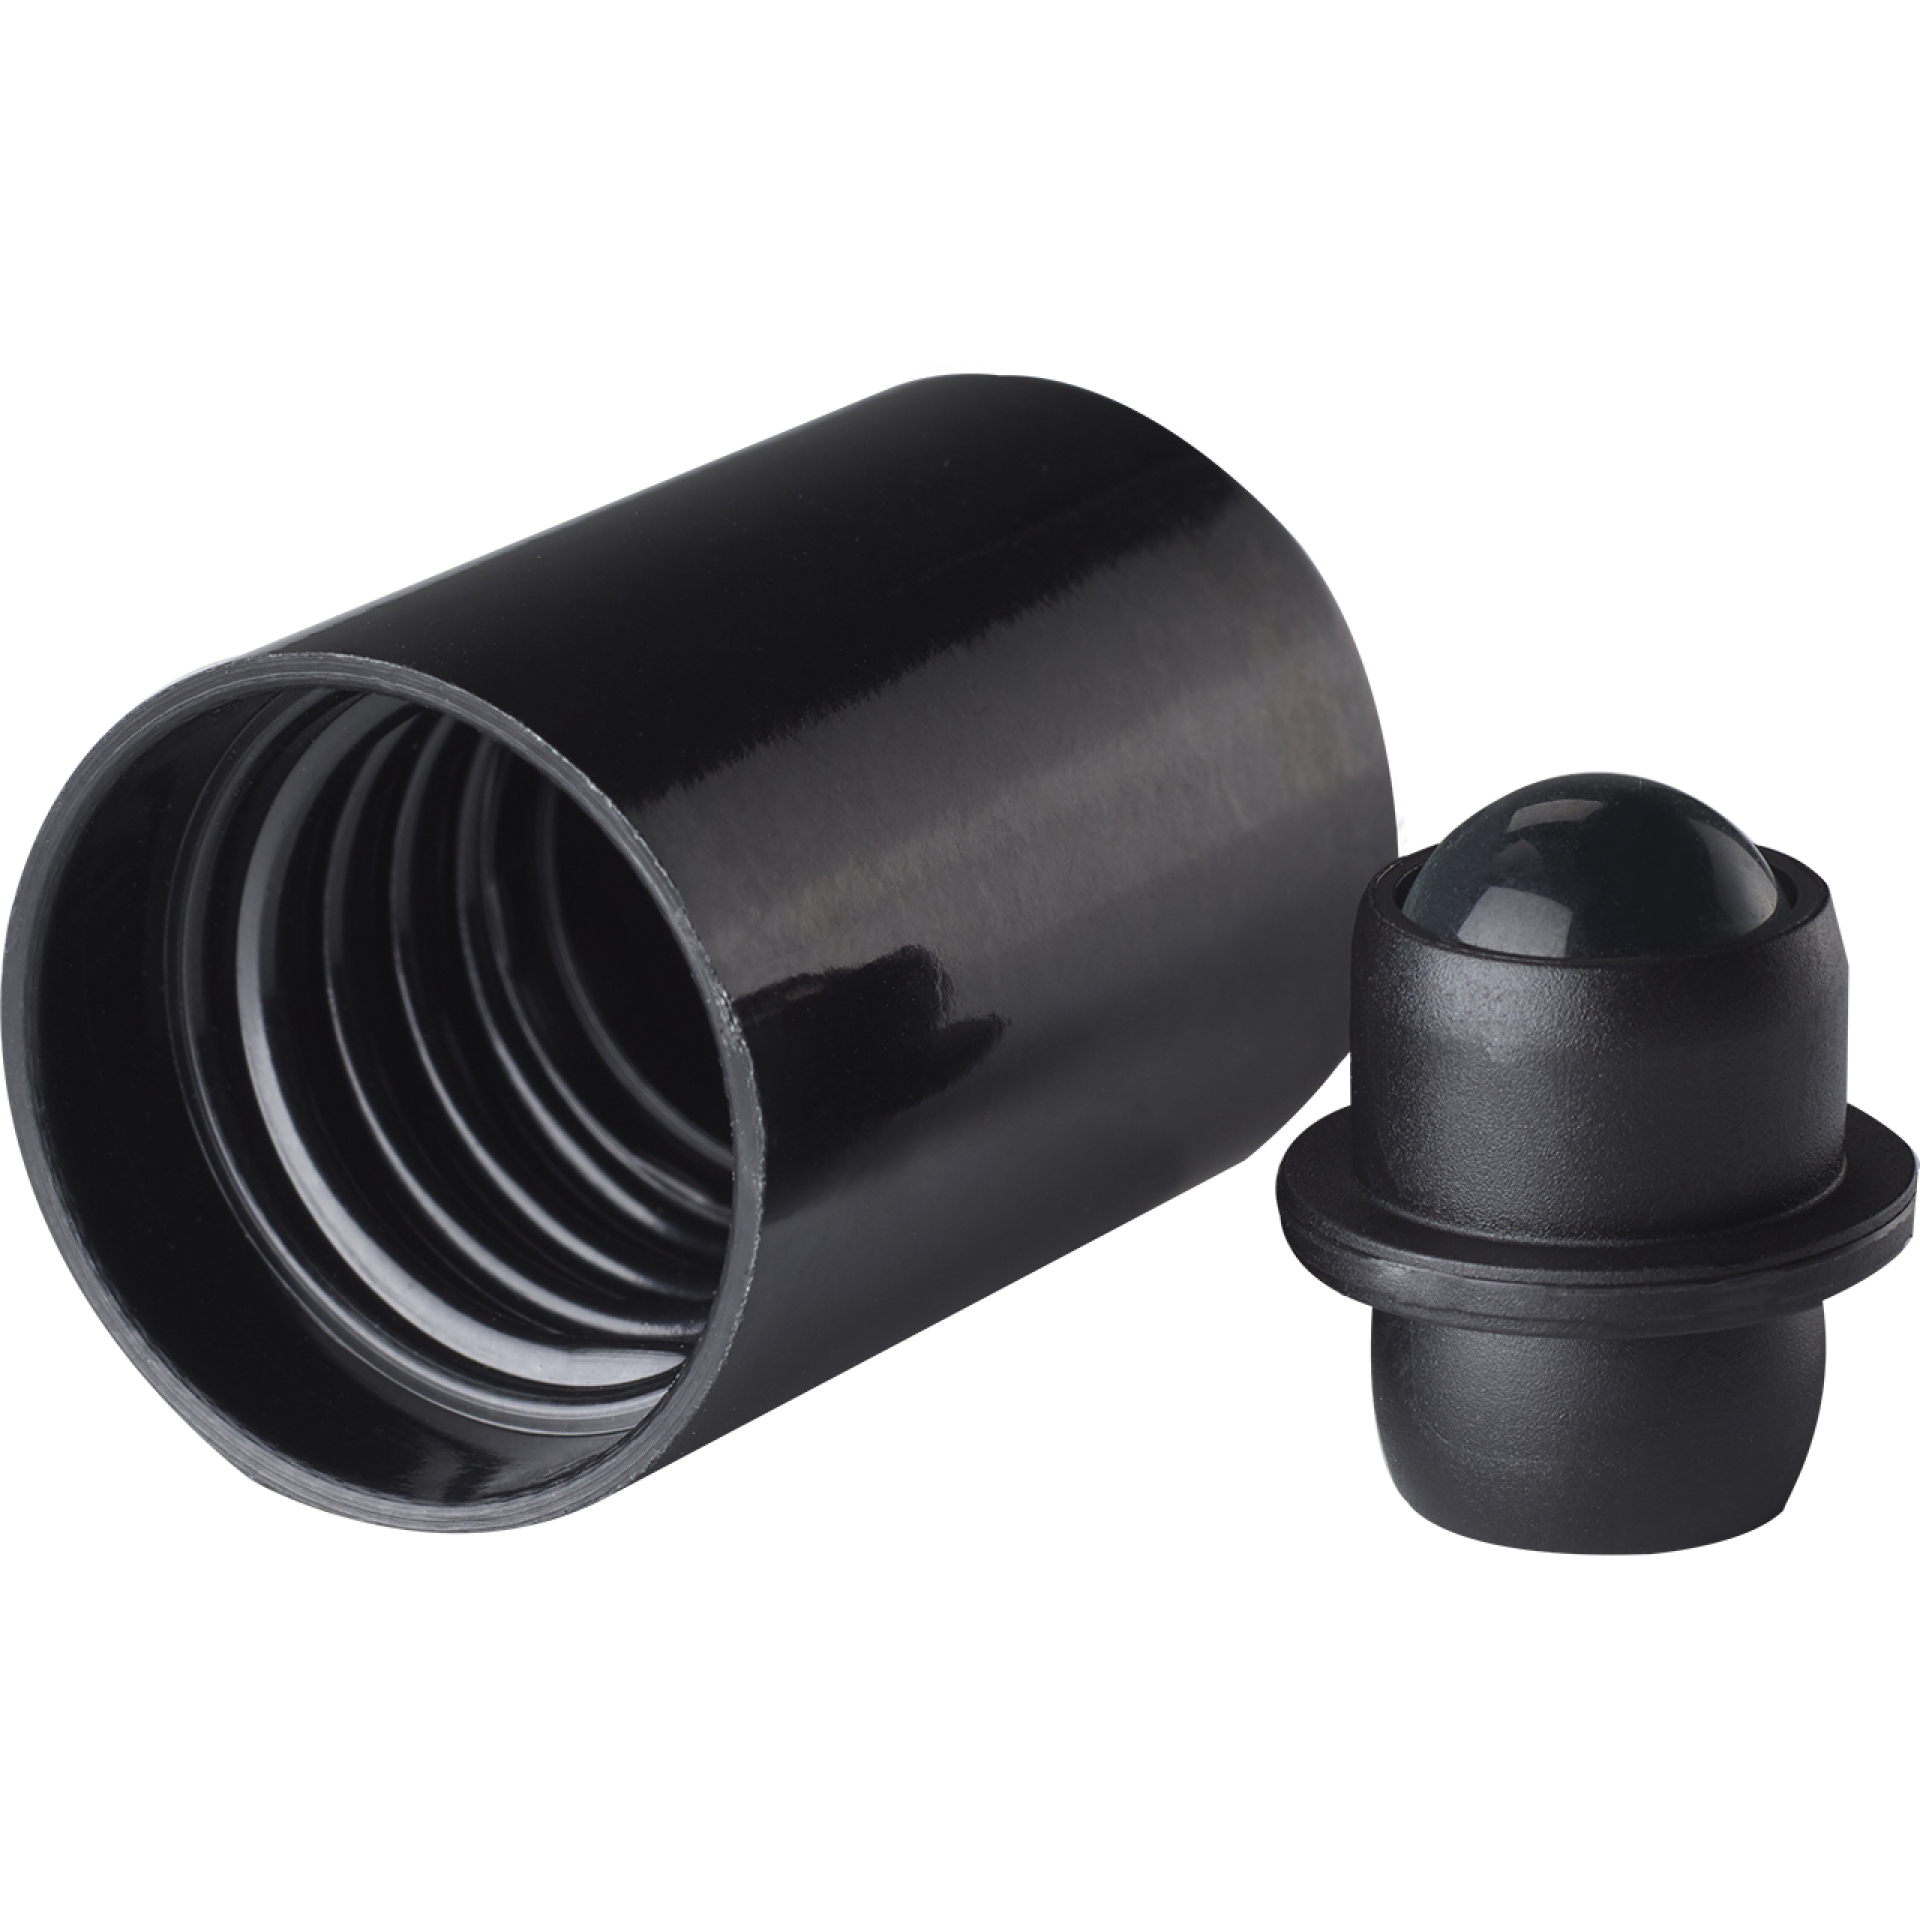 Roll-on cap DIN18, PP, black fitment with polished glass ball, black cap for dropper bottles